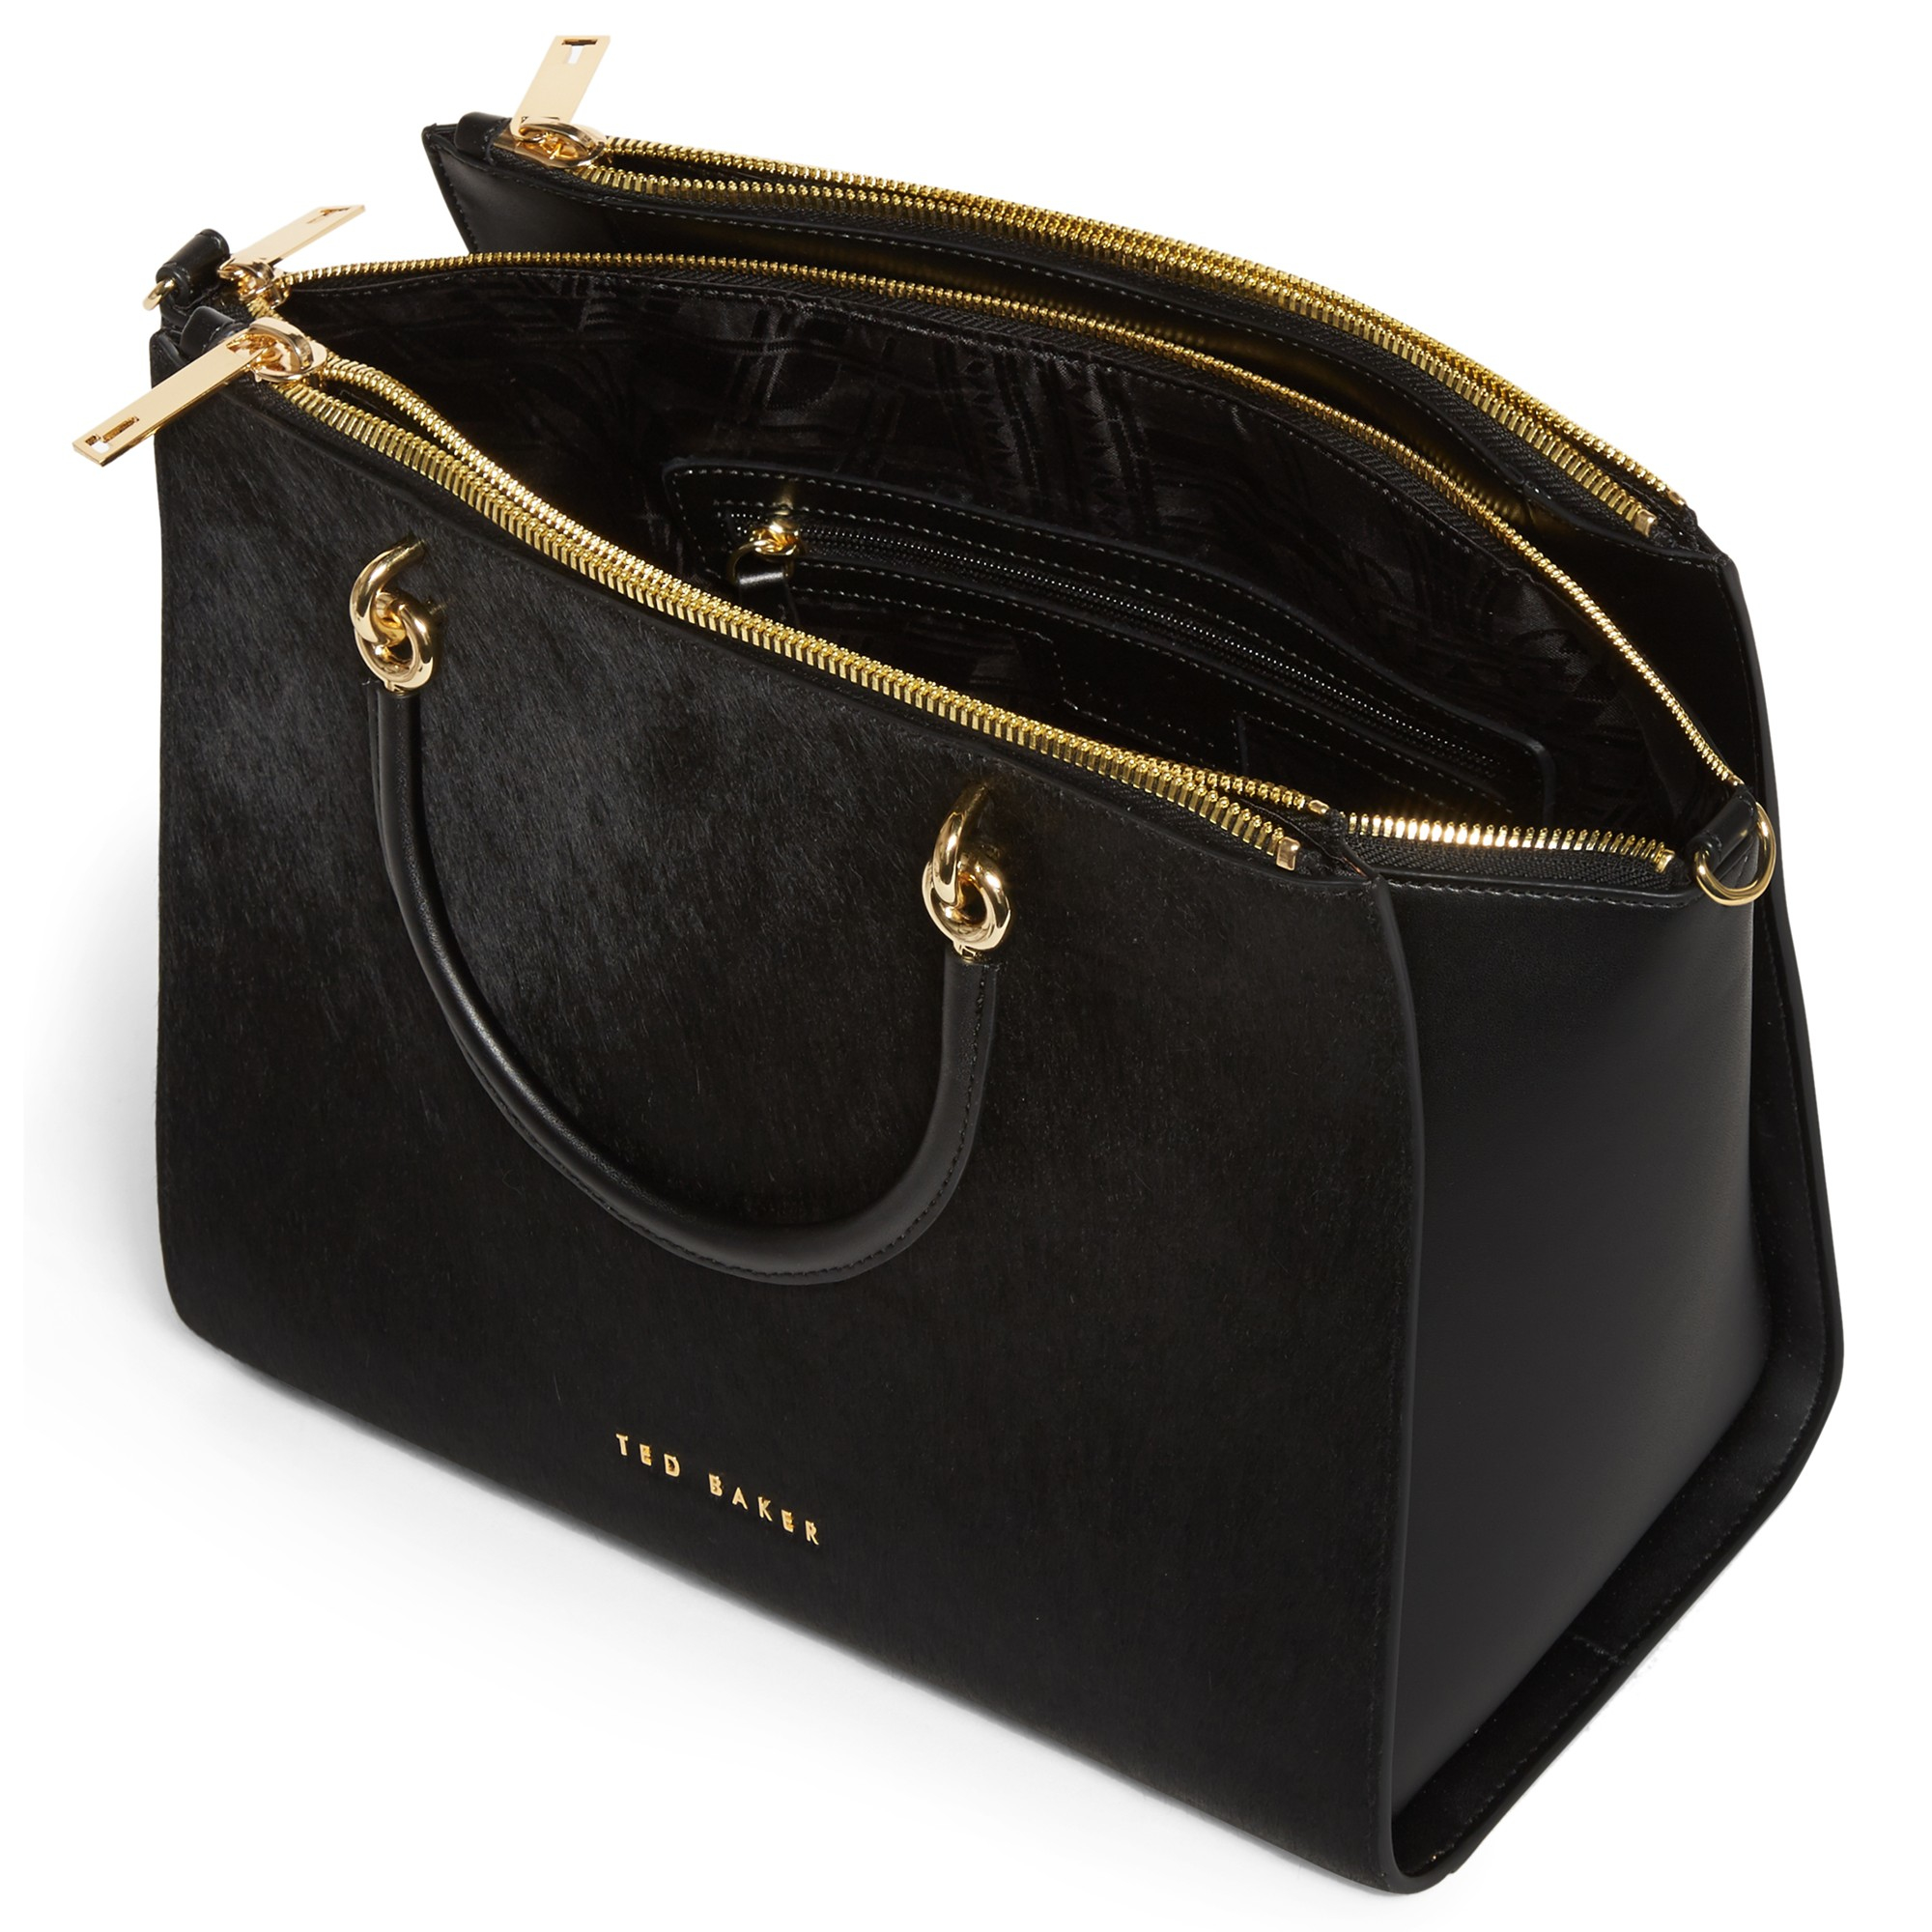 Lyst - Ted baker Haylie Leather Crossbody Bag in Black